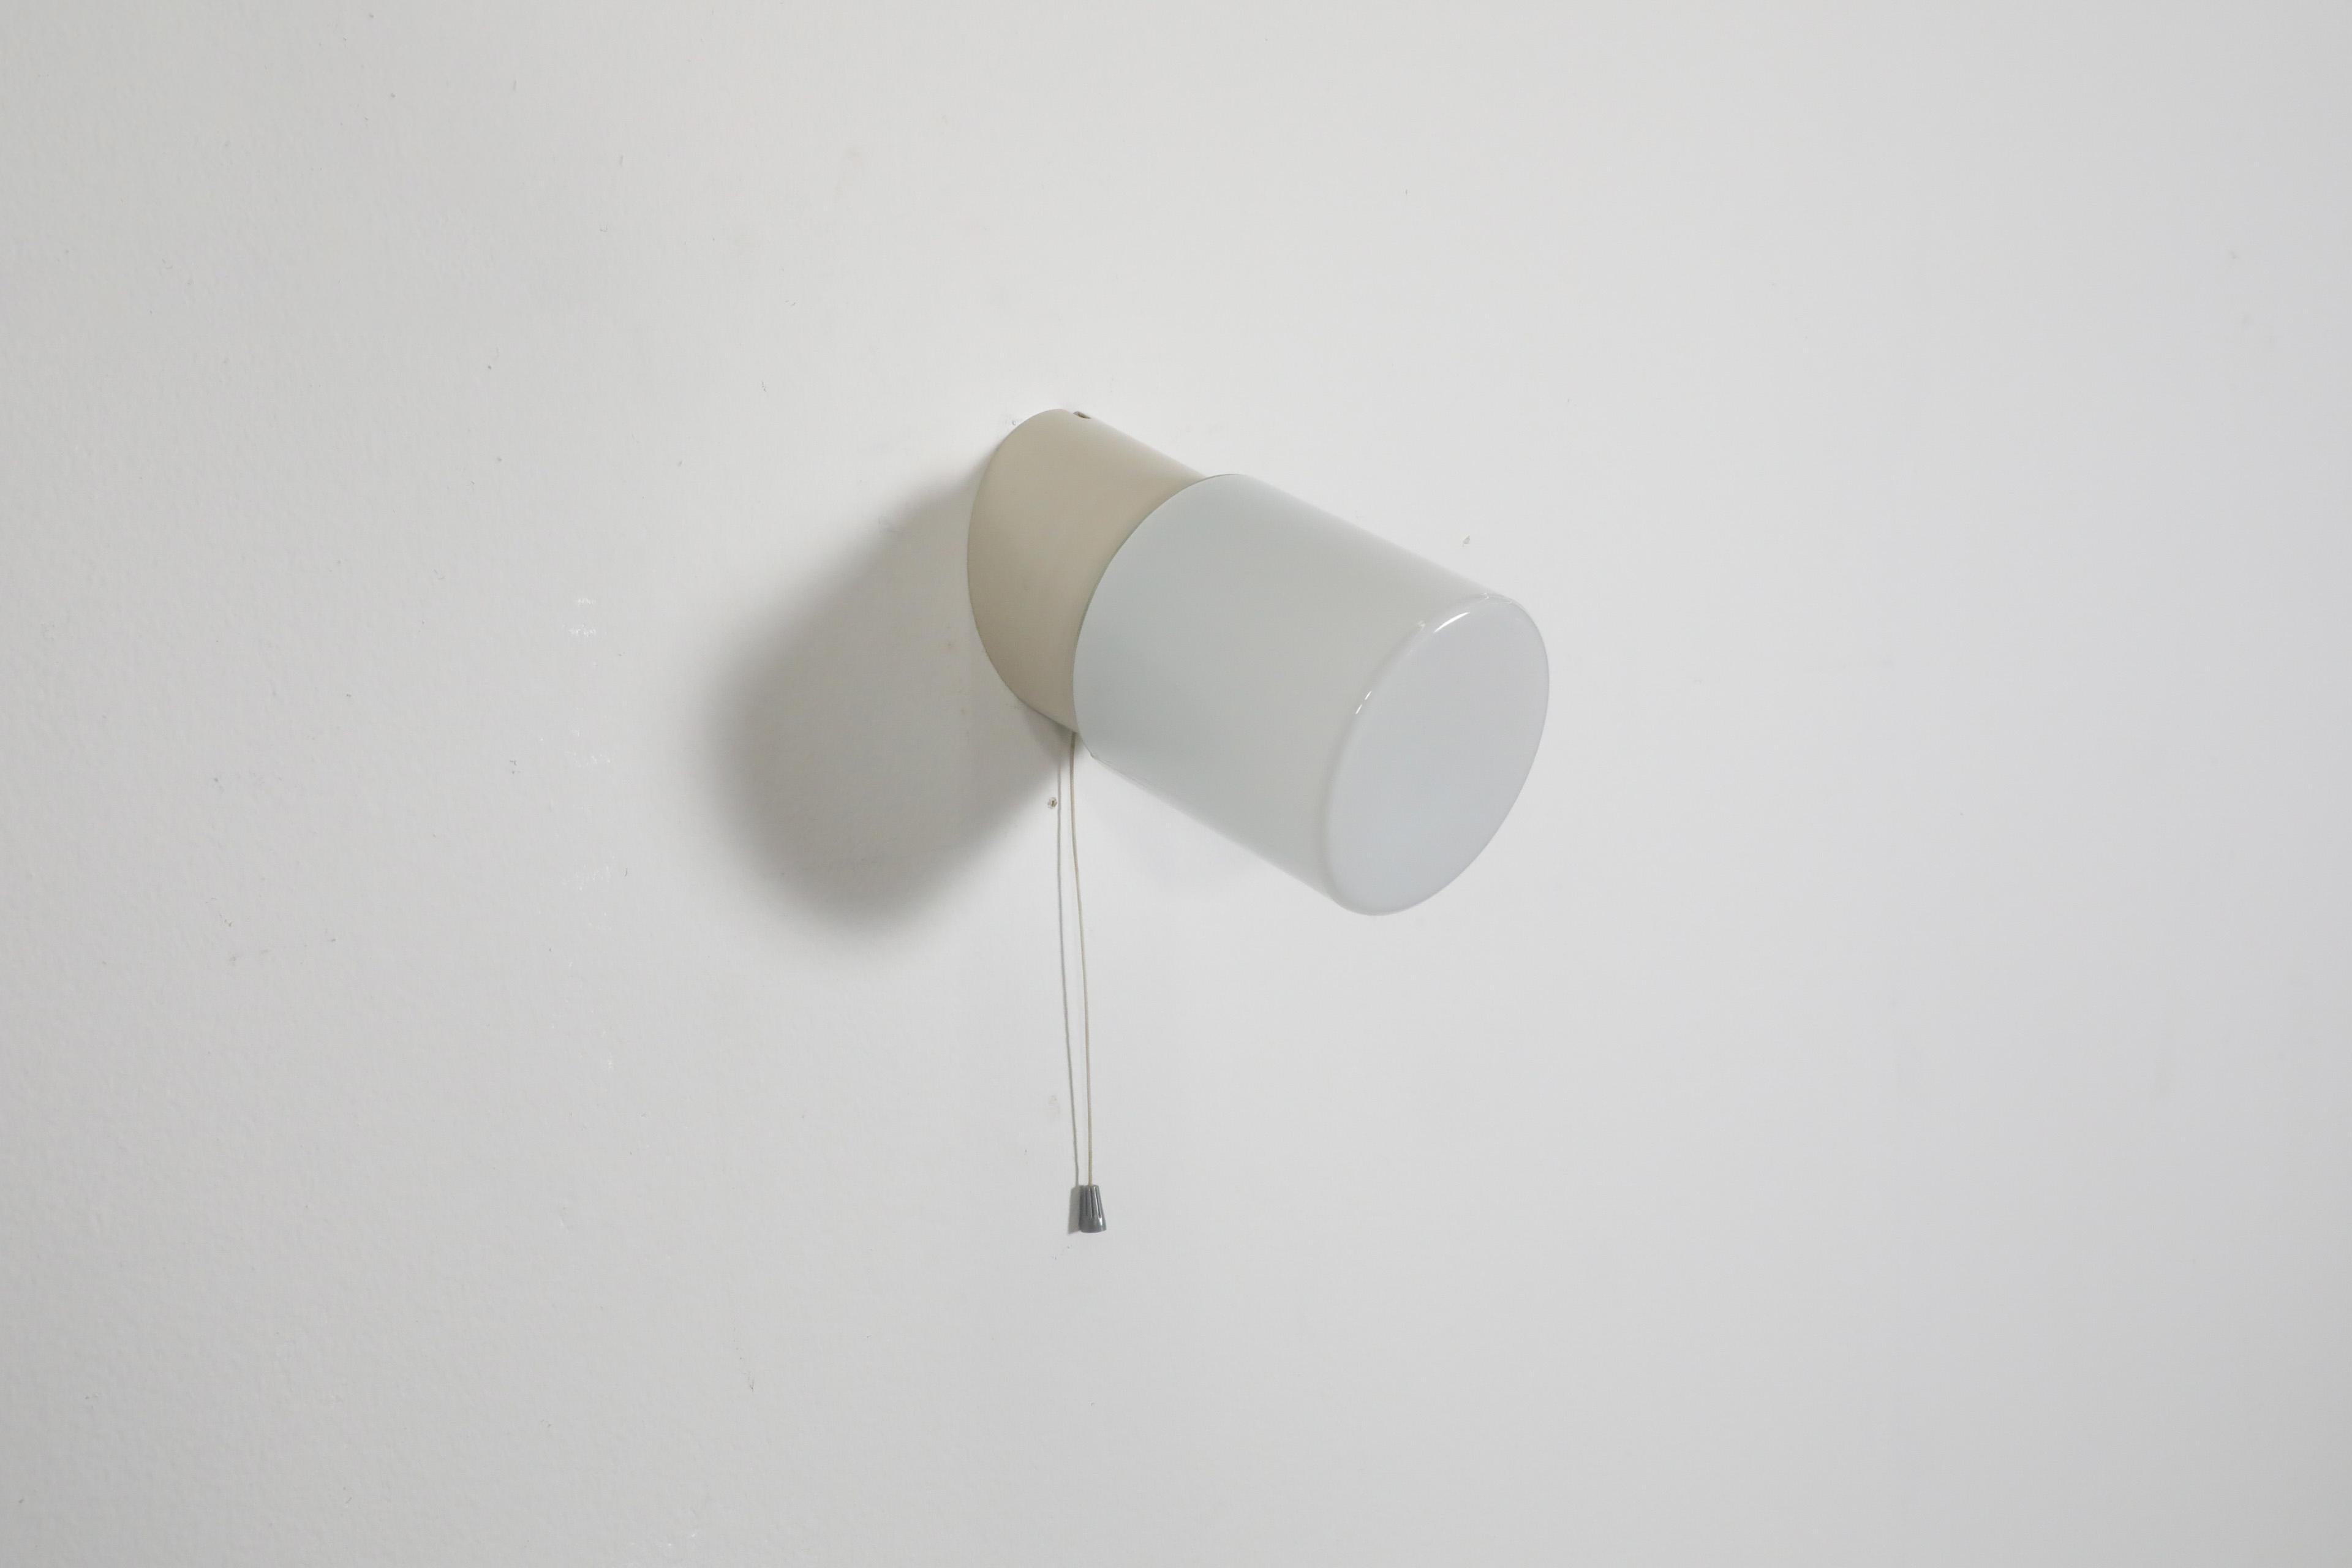 White cylindrical wall or ceiling sconce with angled bakelite base, white cylinder glass shade and pull string switch. This lamp is for hard wire installation, but a cord can be added, as there are notches in the base. In original condition with